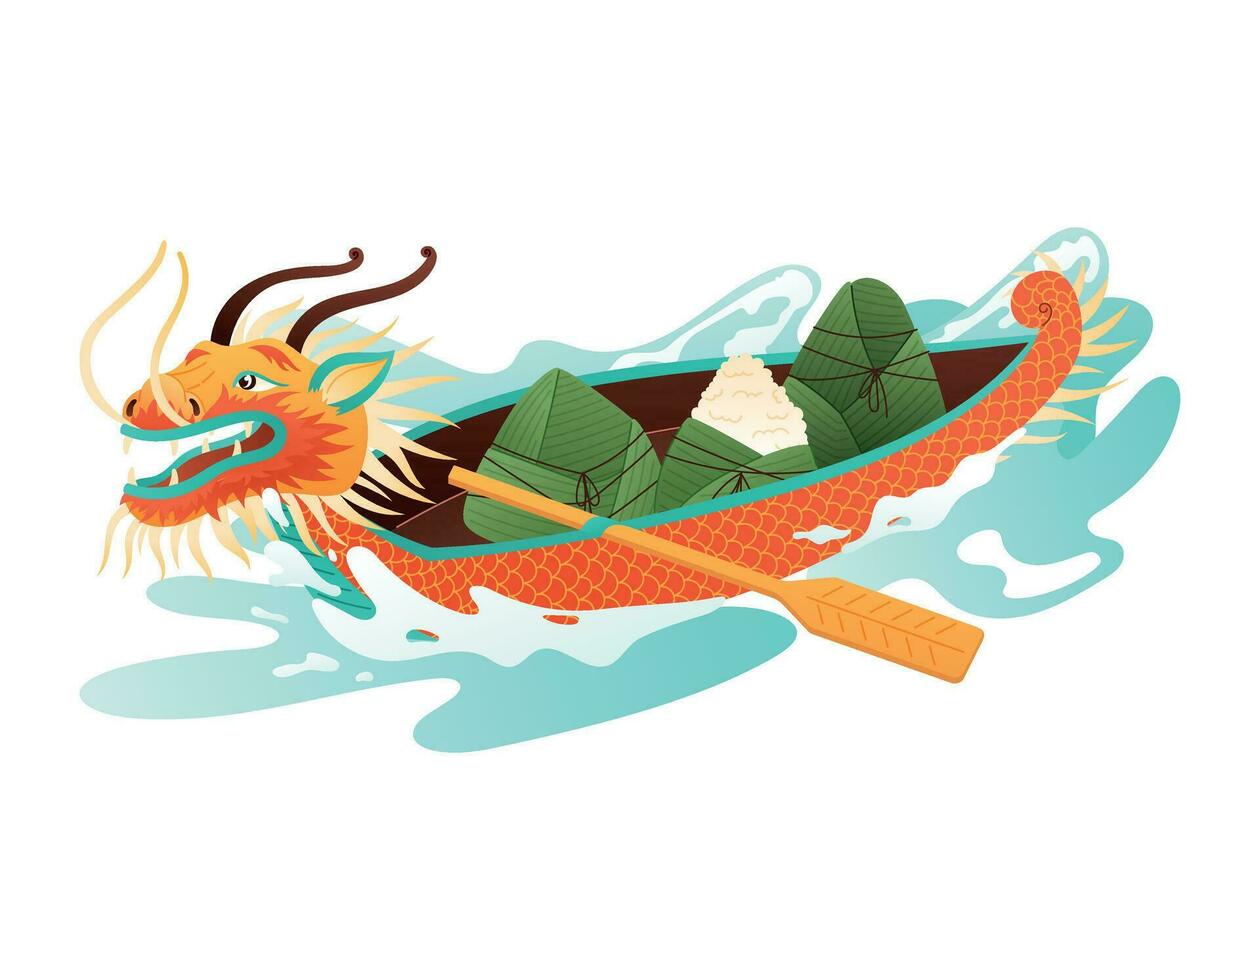 Chinese dragon boat with Asian food, zongzi dumplings. Vector cartoon illustration of Traditional oriental water transport.